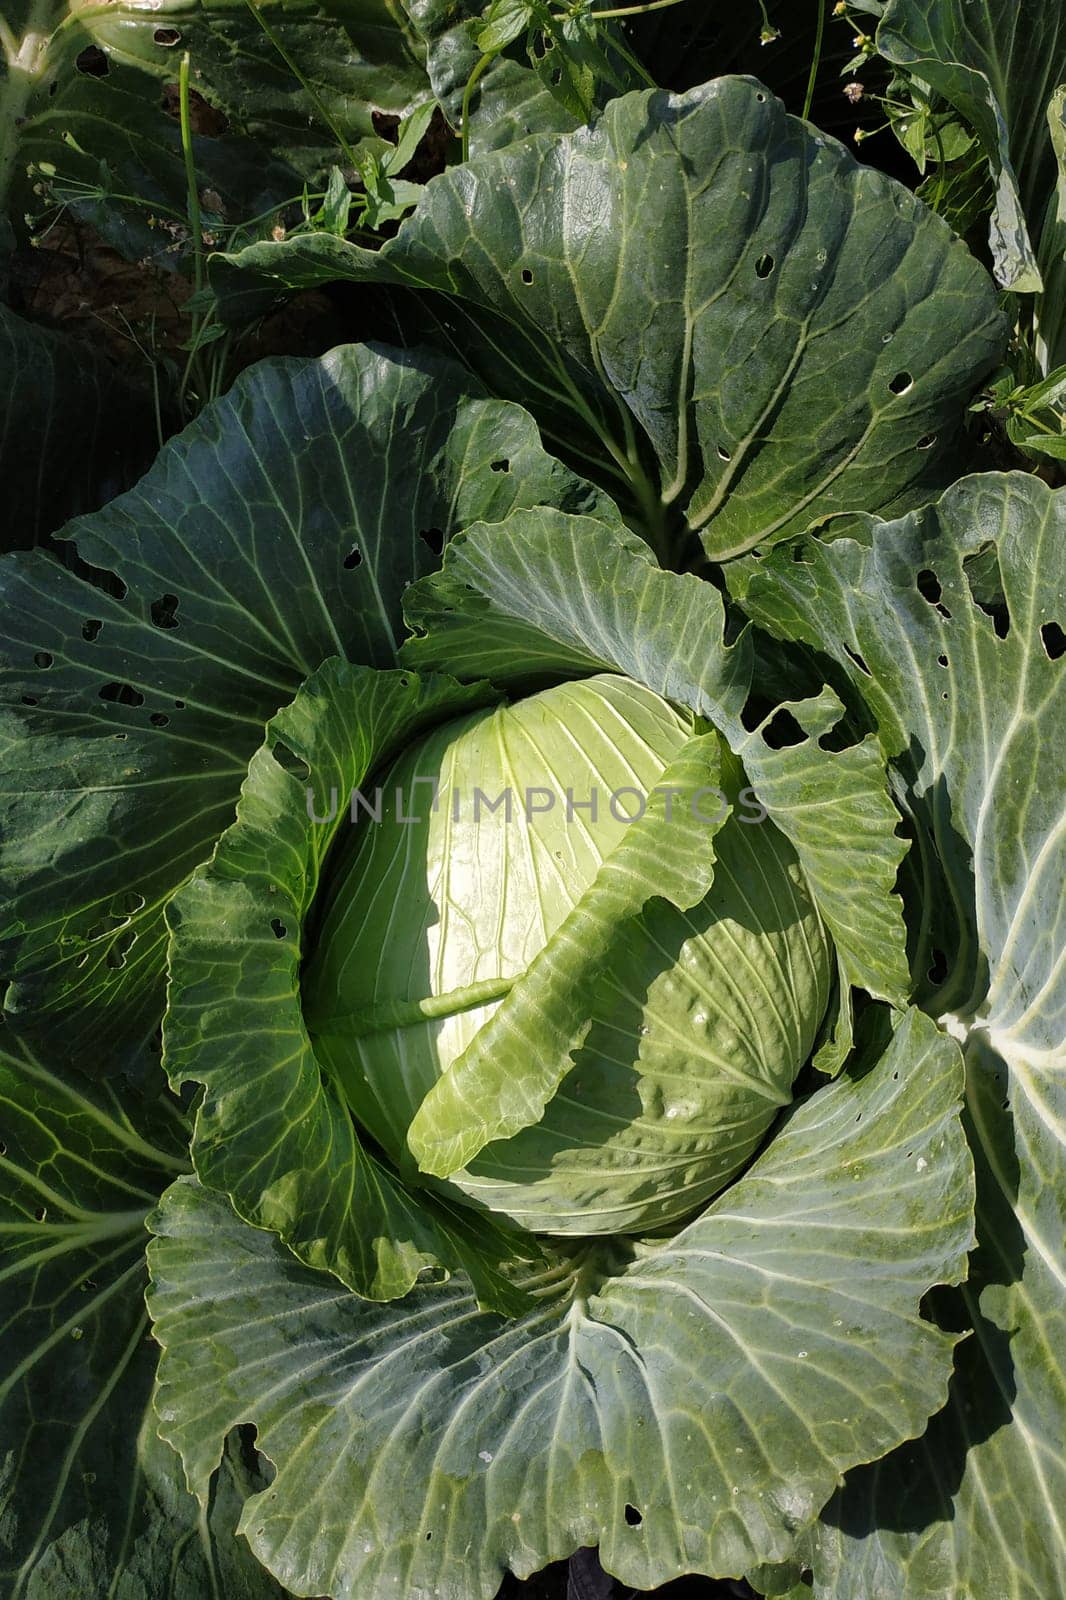 One head of large green cabbage in the garden, growing vegetables.